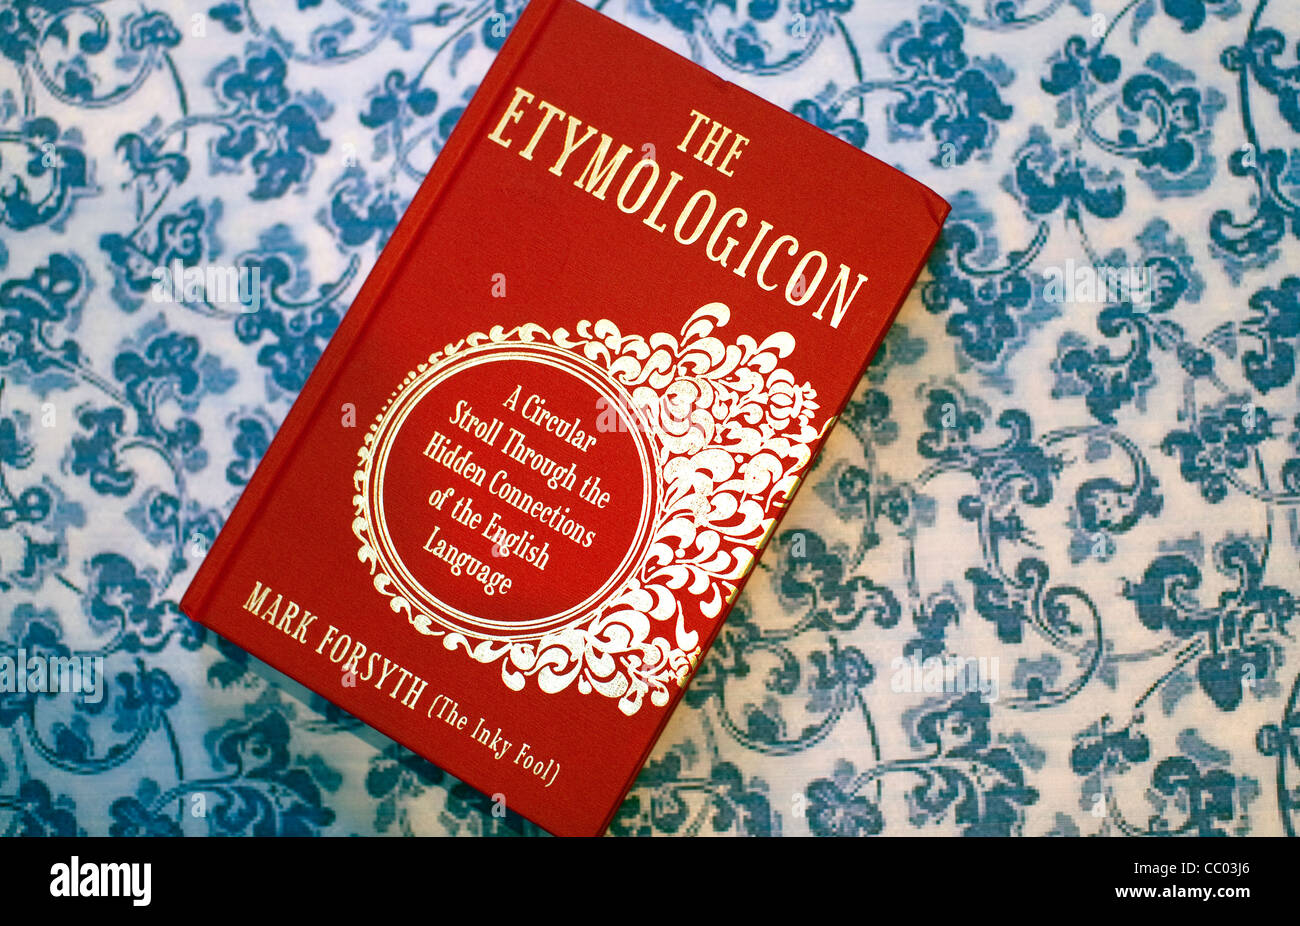 The Etymologicon by Mark Forsyth - best-selling book about the English language Stock Photo